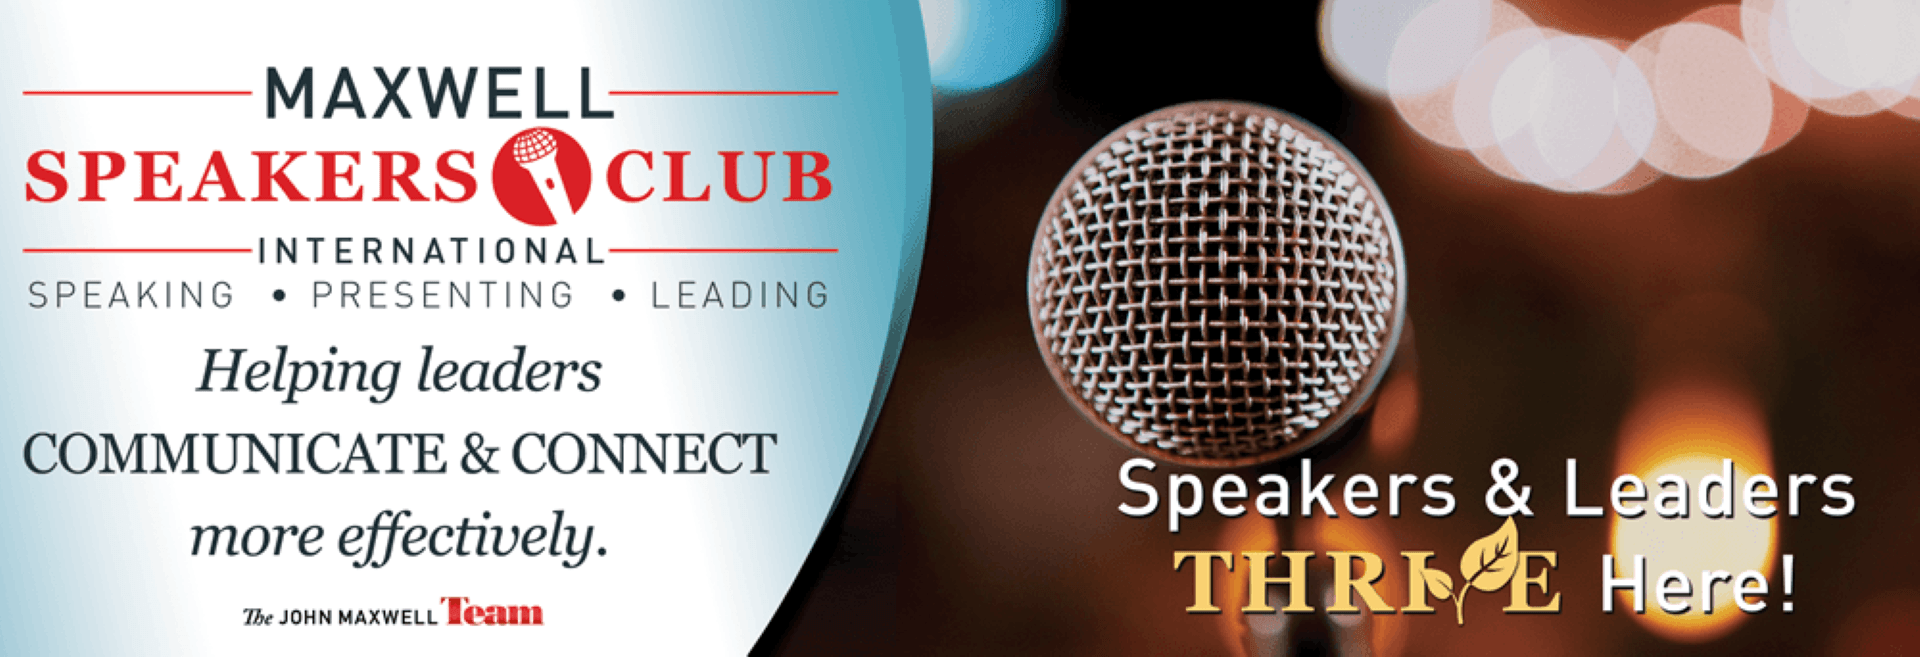 THE MAXWELL SPEAKERS CLUB